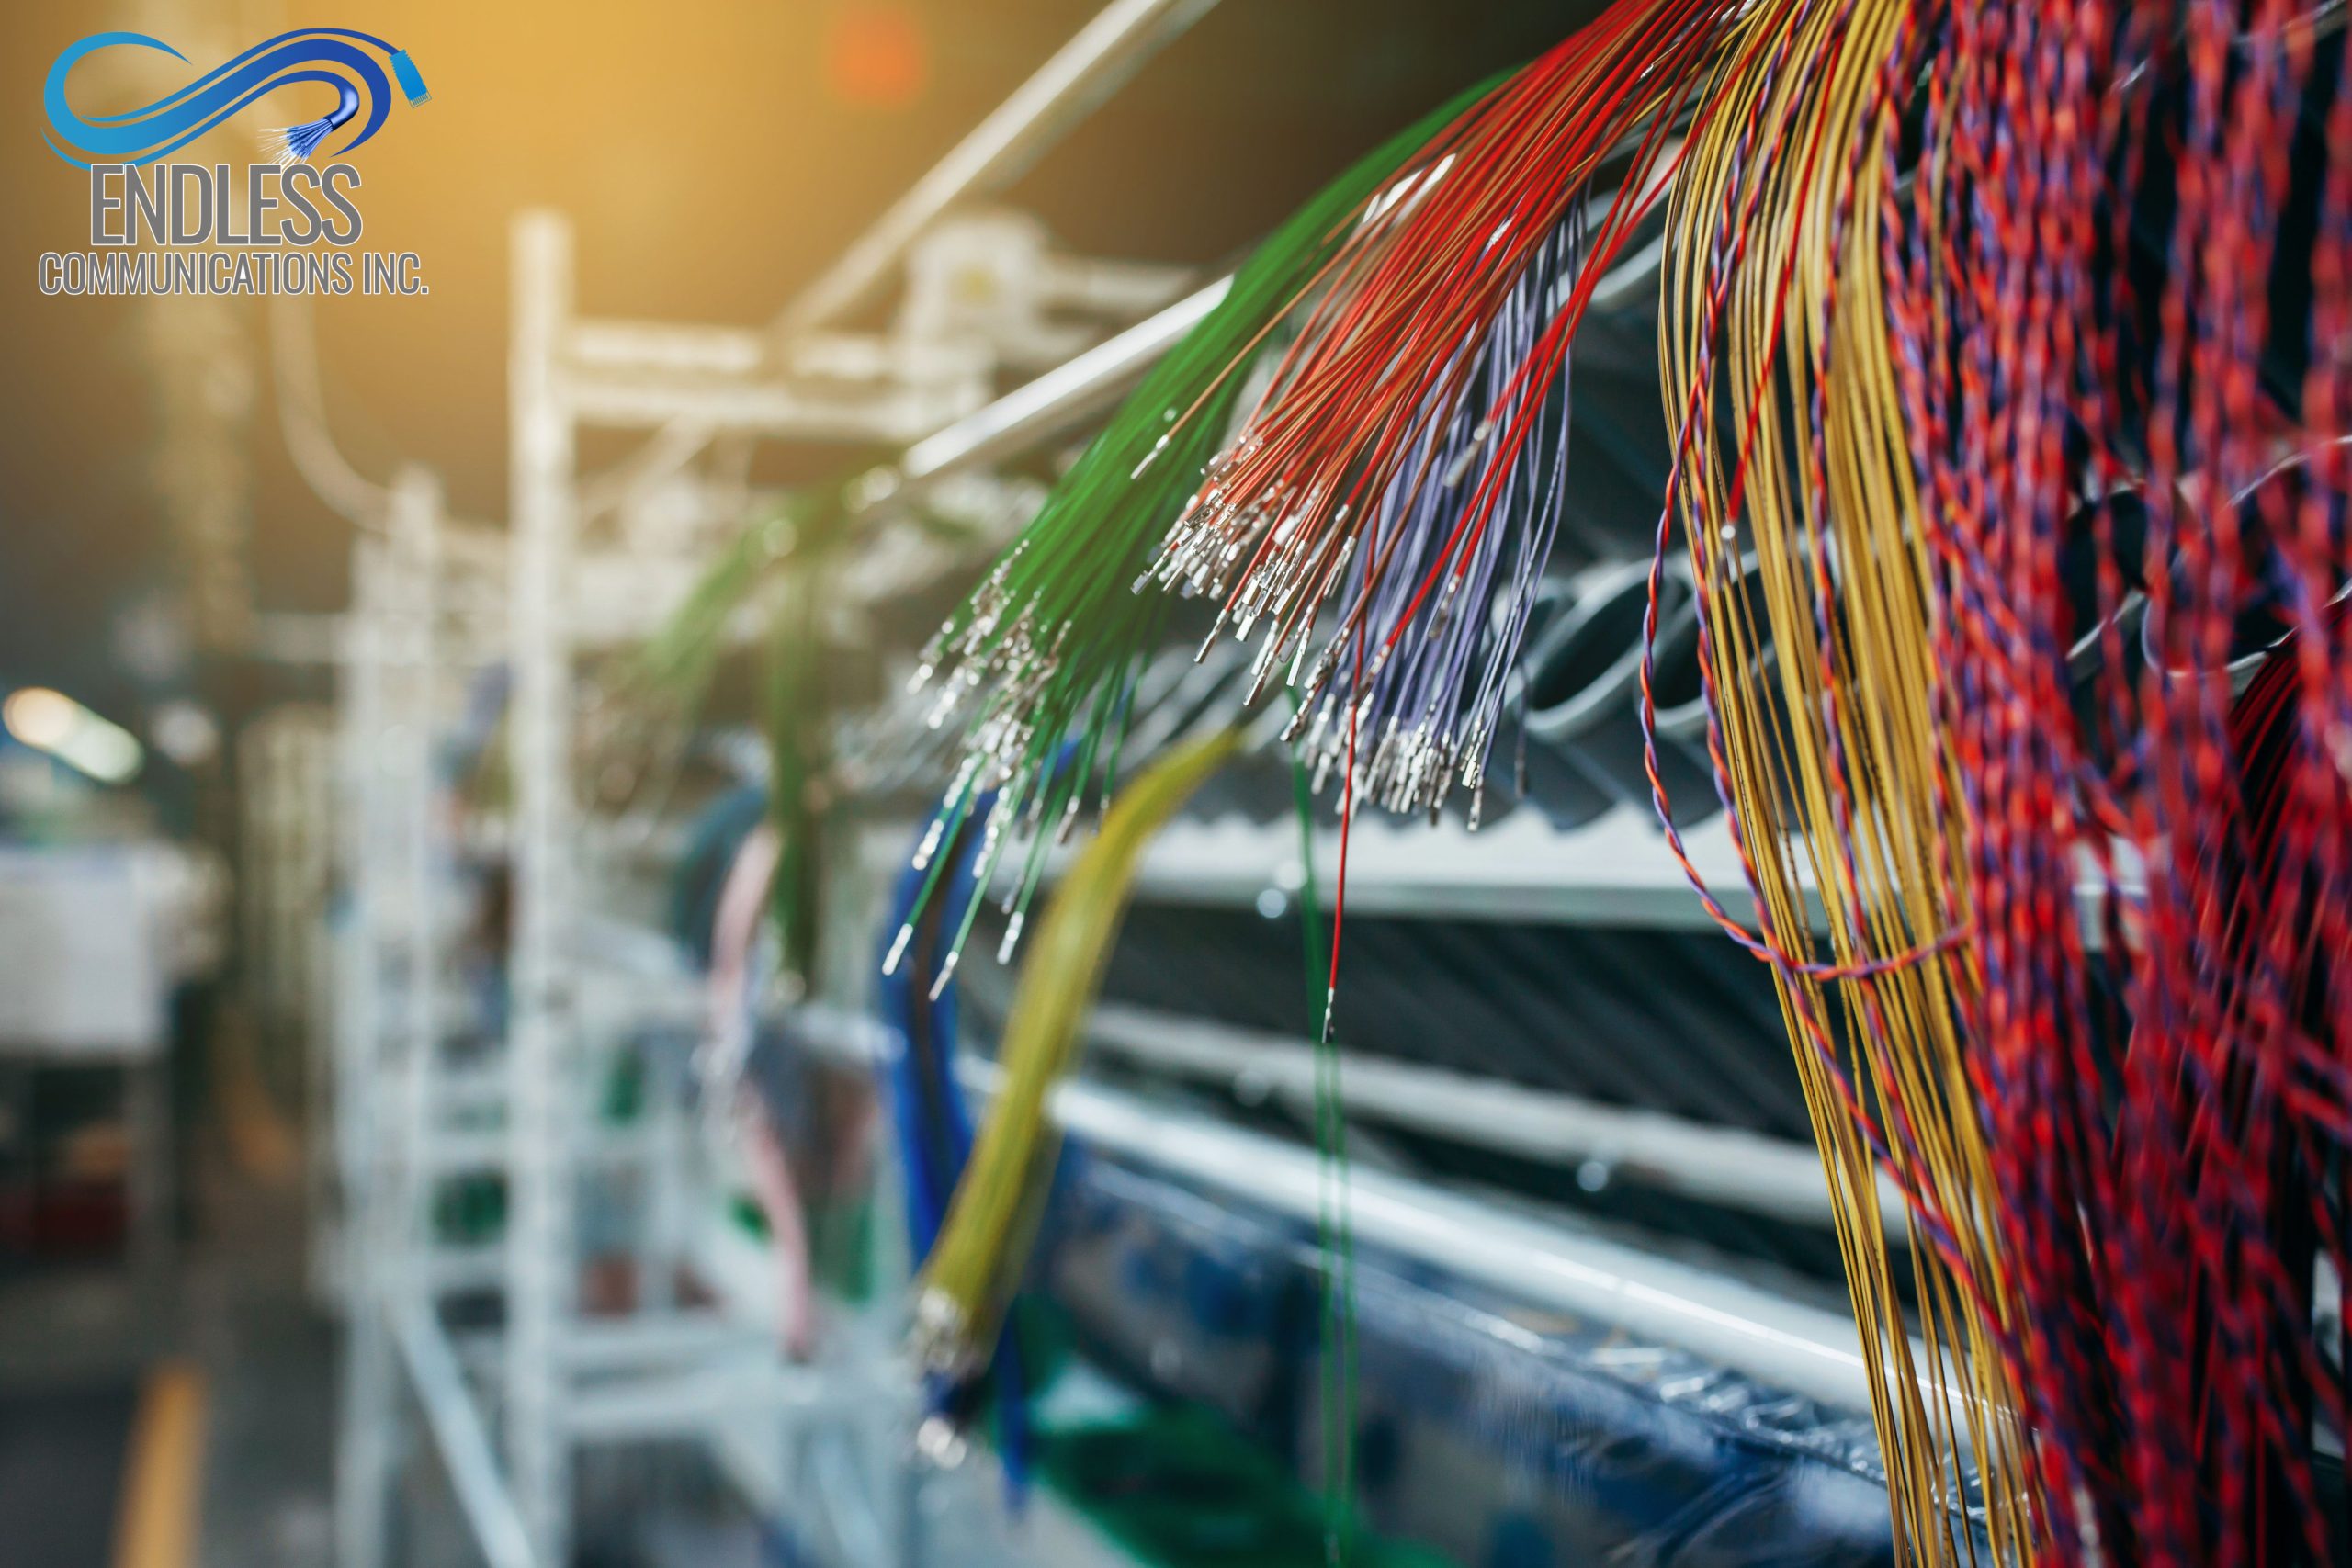 Network Cabling Services By Trusted, Skilled Technicians